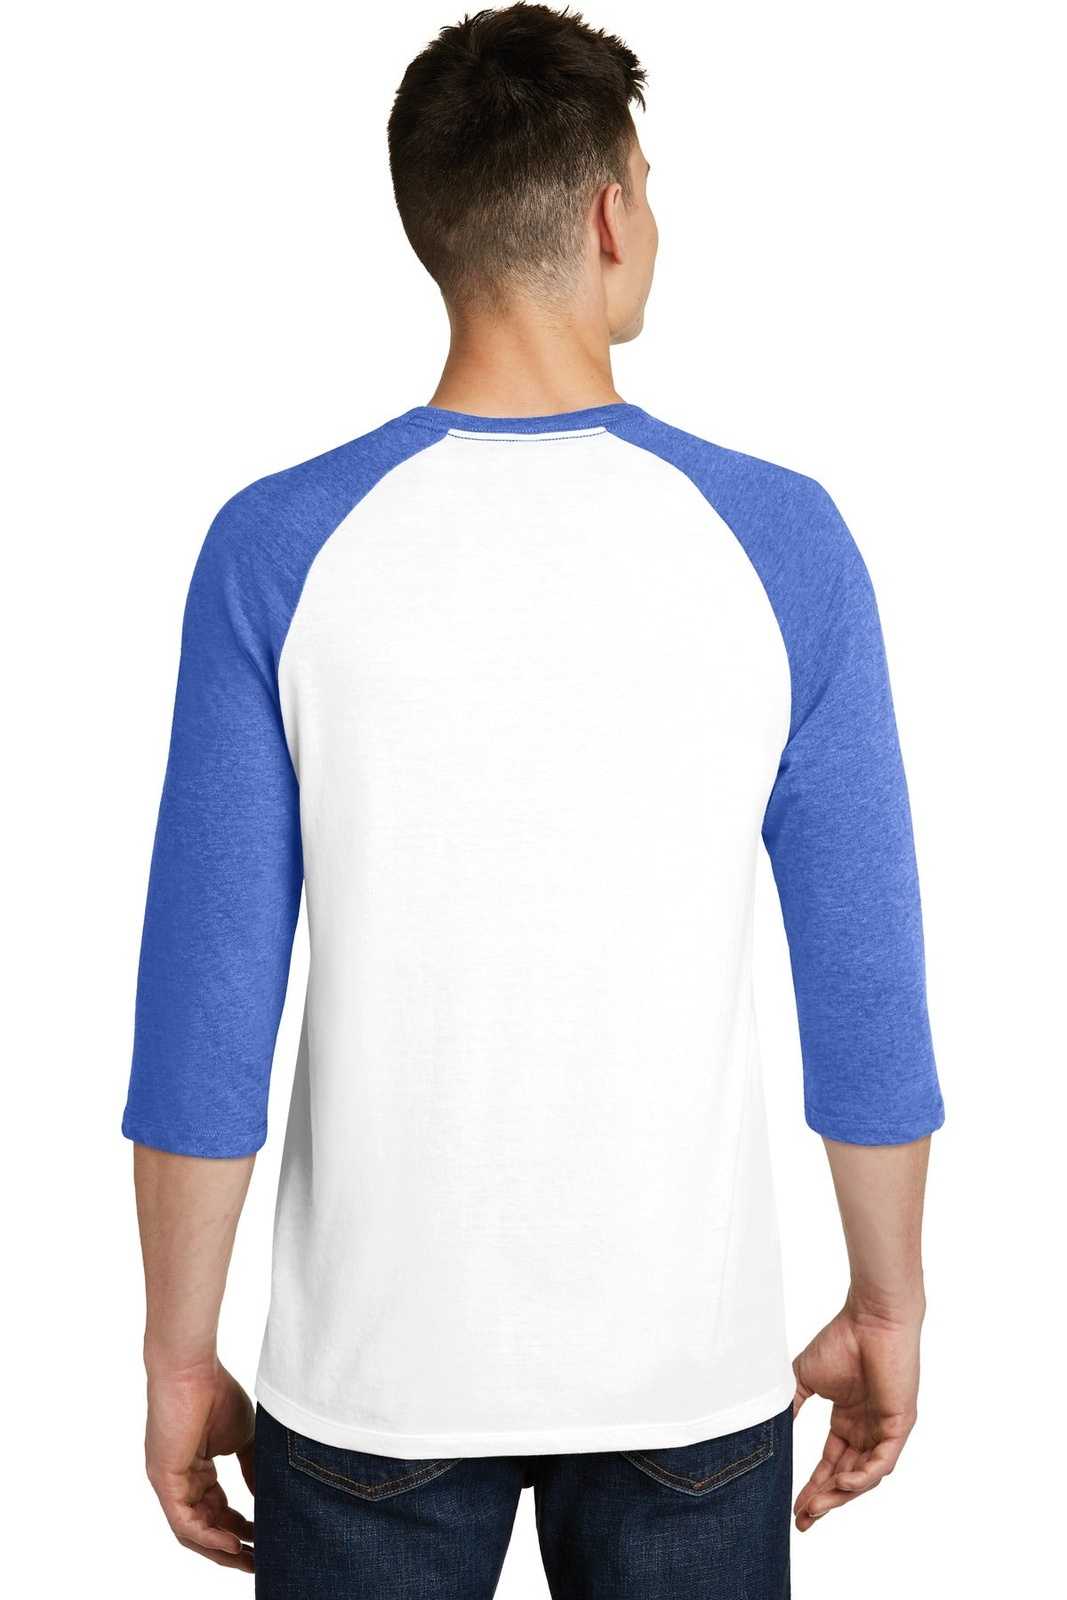 District DT6210 Very Important Tee 3/4-Sleeve Raglan - Royal Frost White - HIT a Double - 1